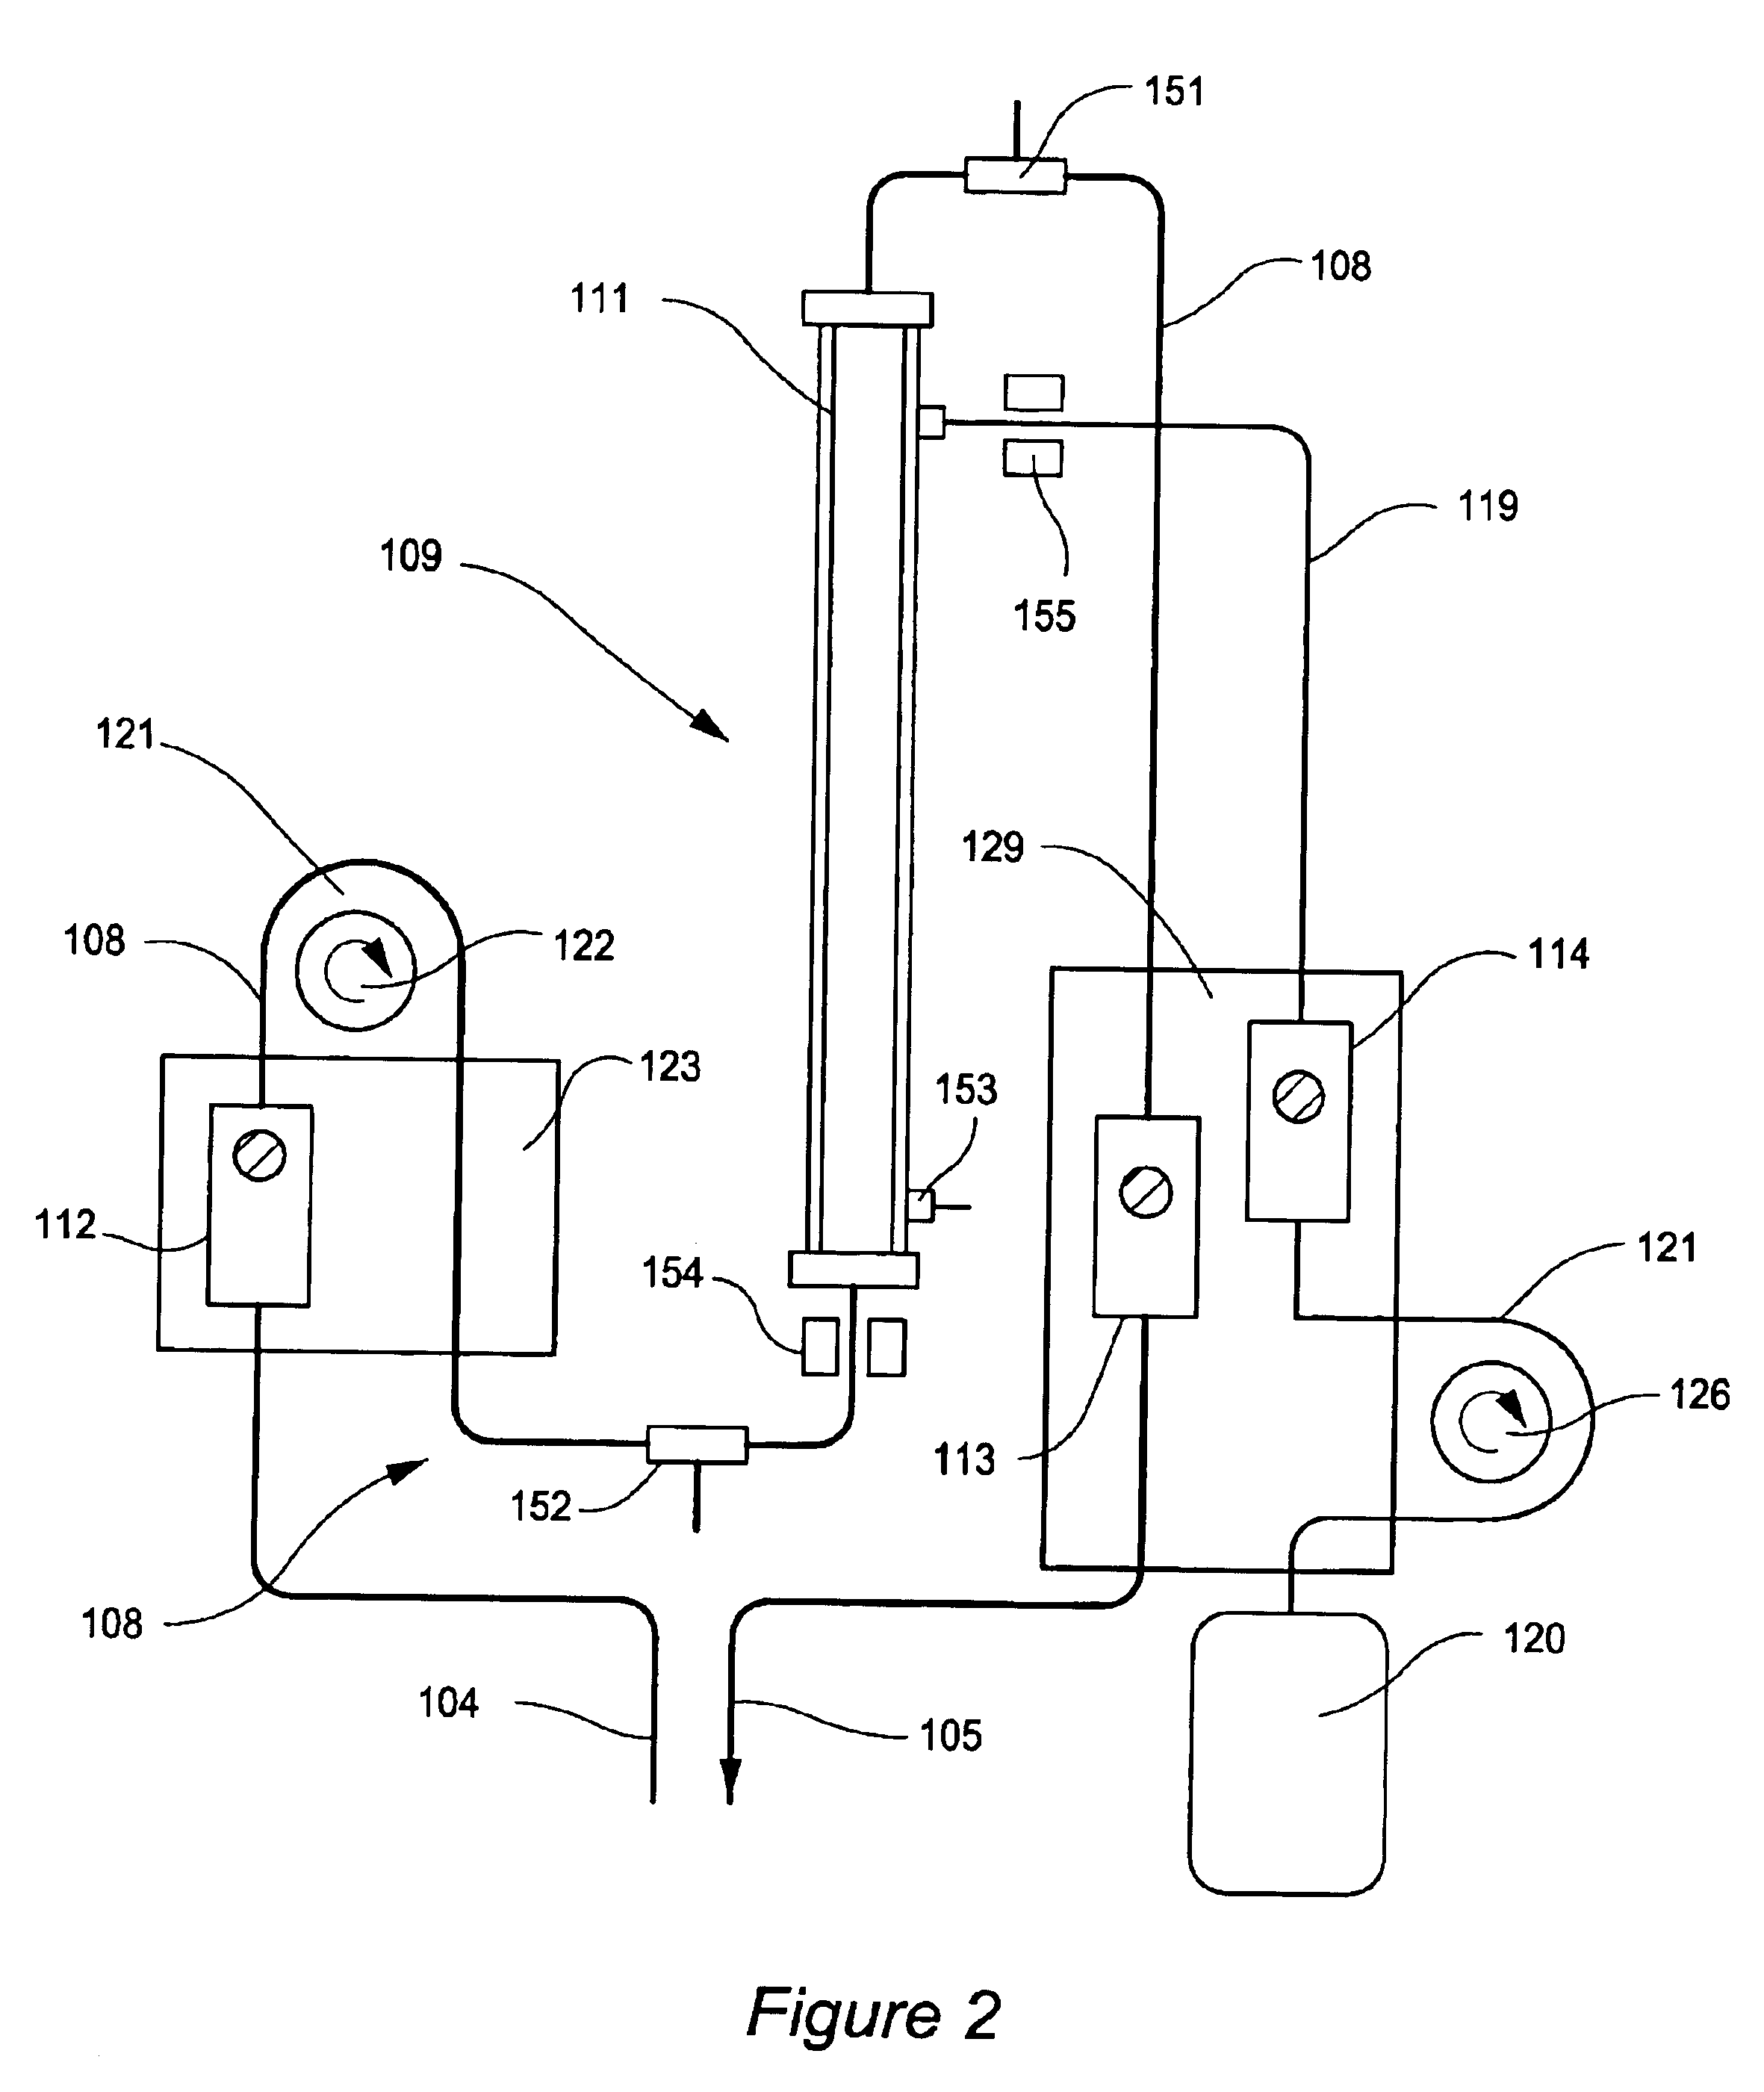 User interface for blood treatment device